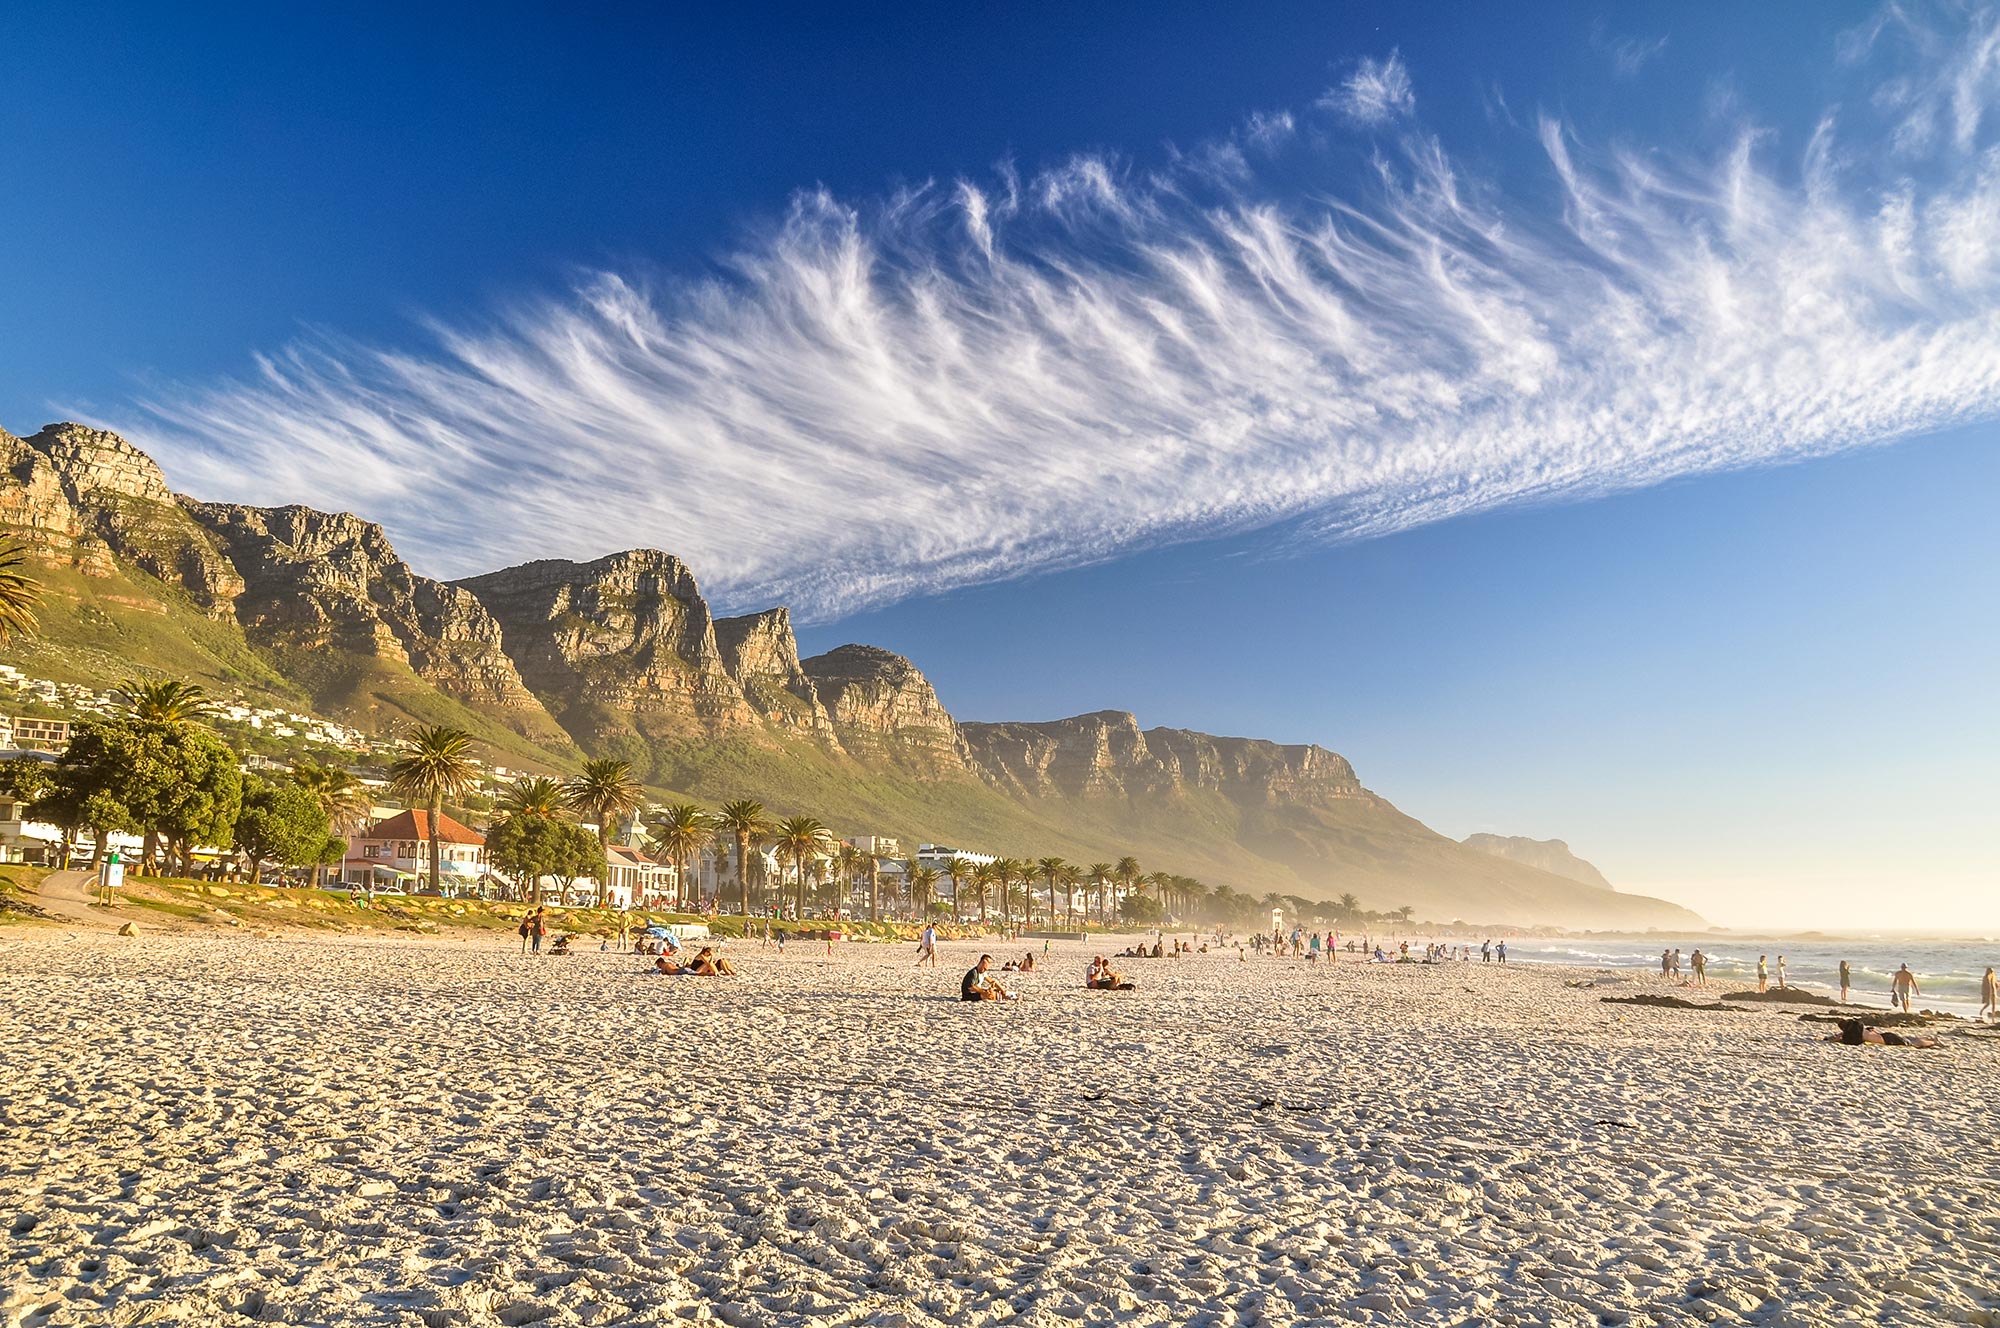 Best Beaches in the World: Camps Bay Beach